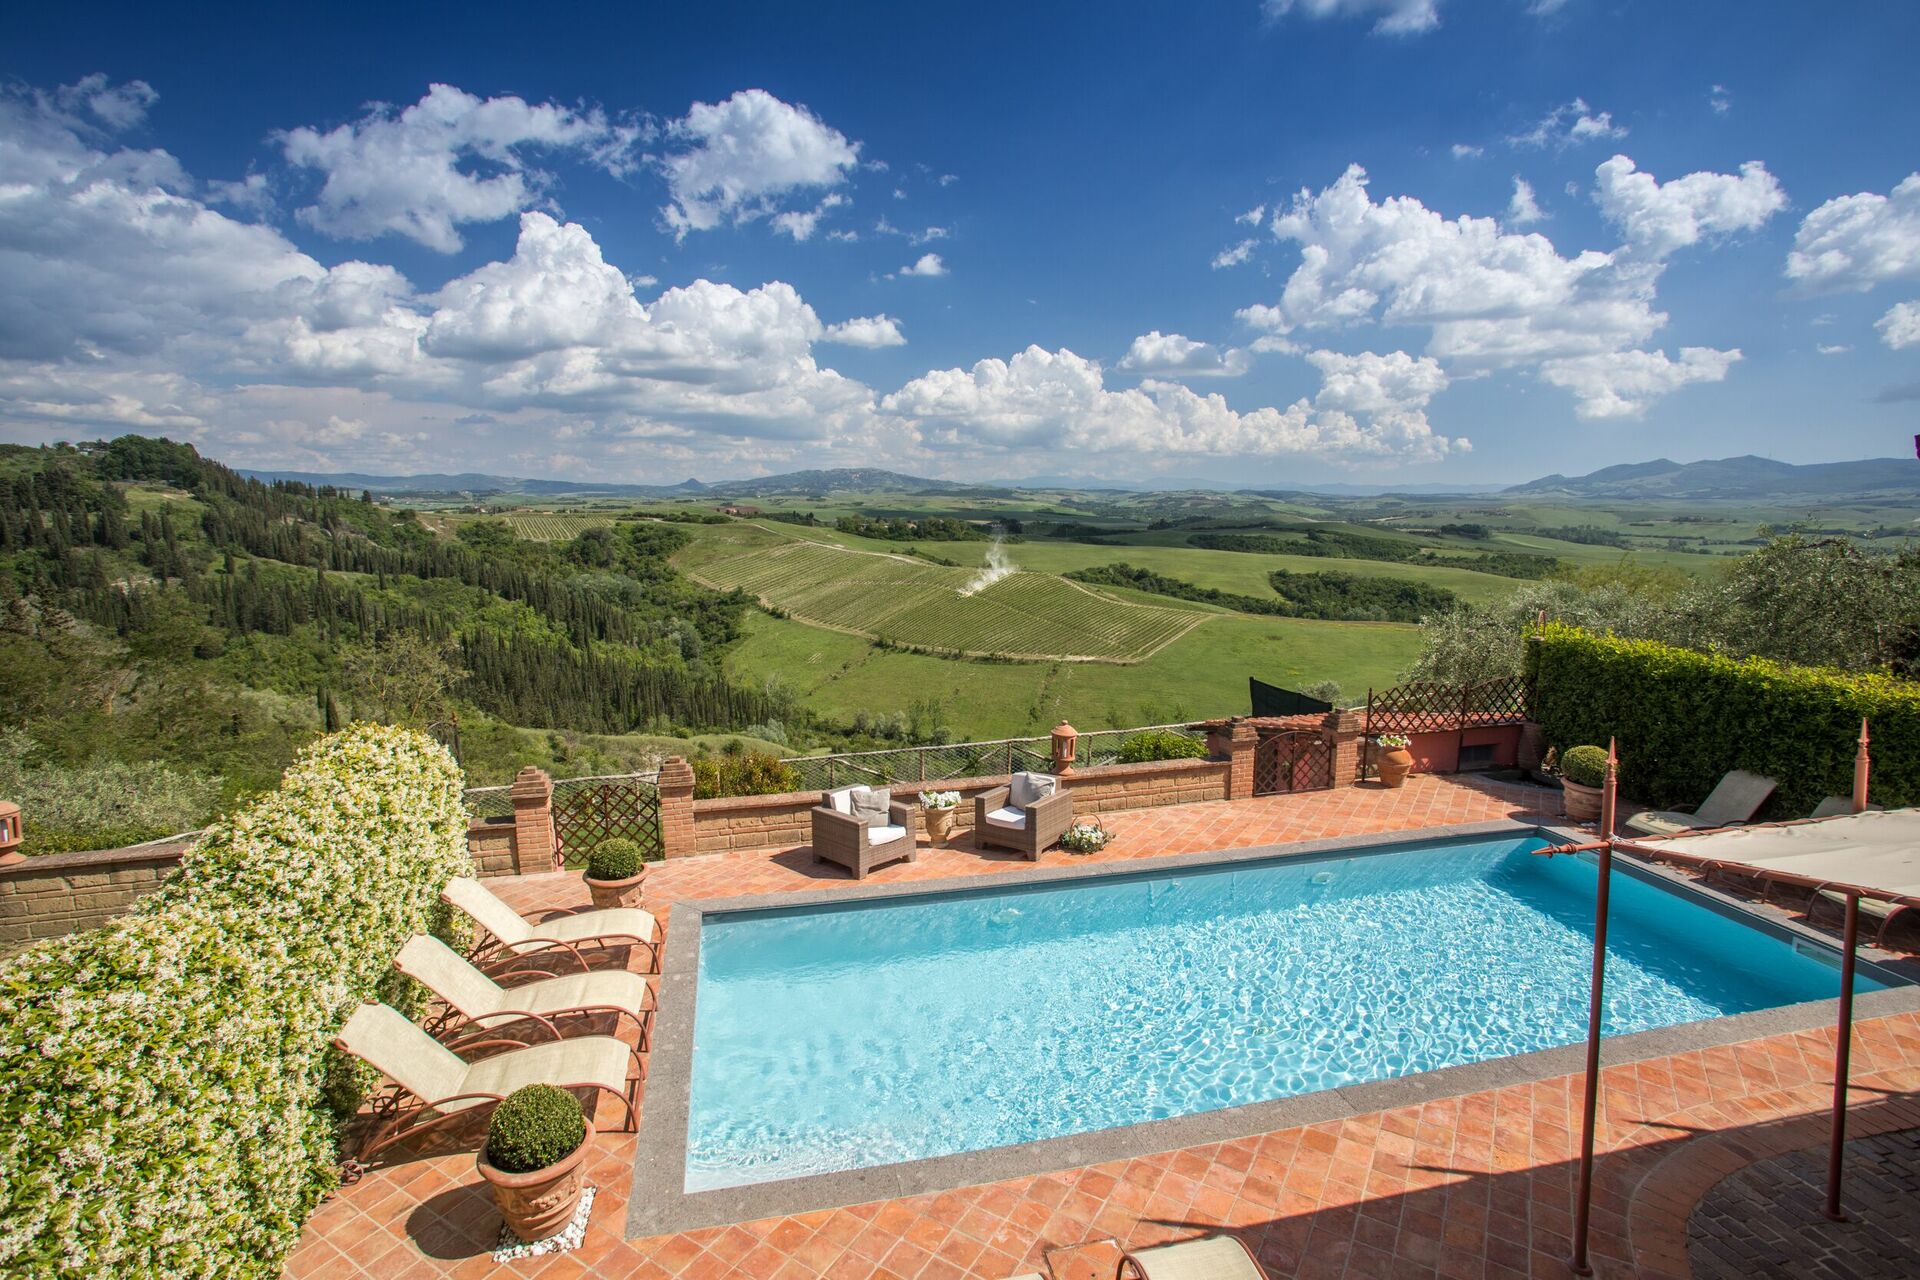 Agritourism cottage in Tuscany… with swimming pool please!